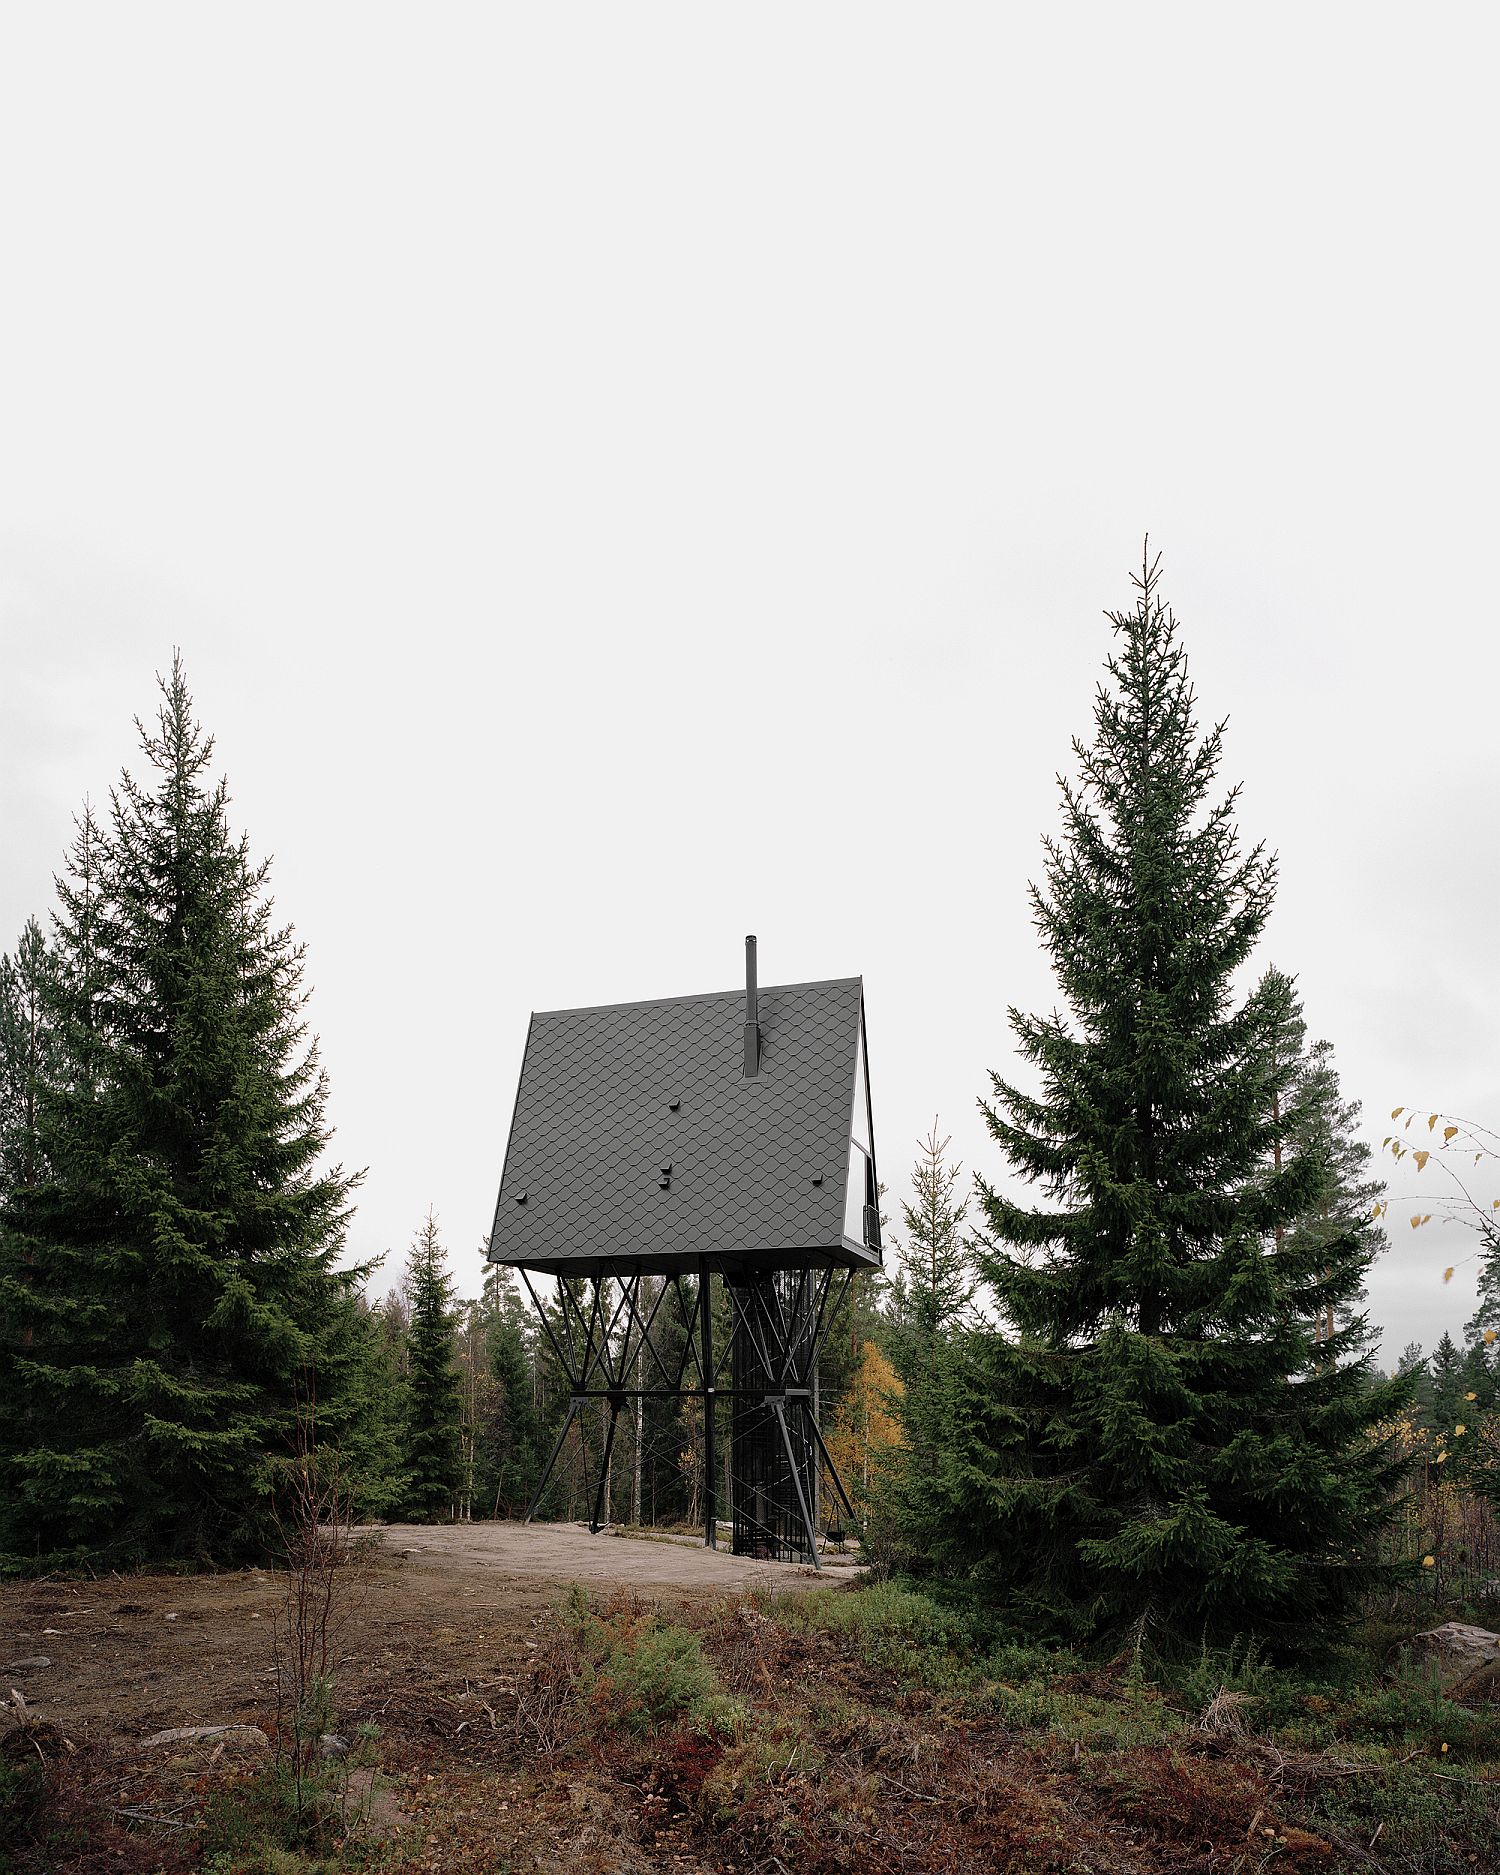 Steel-plays-a-major-role-in-shaping-the-sturdy-exterior-of-the-forest-cabin